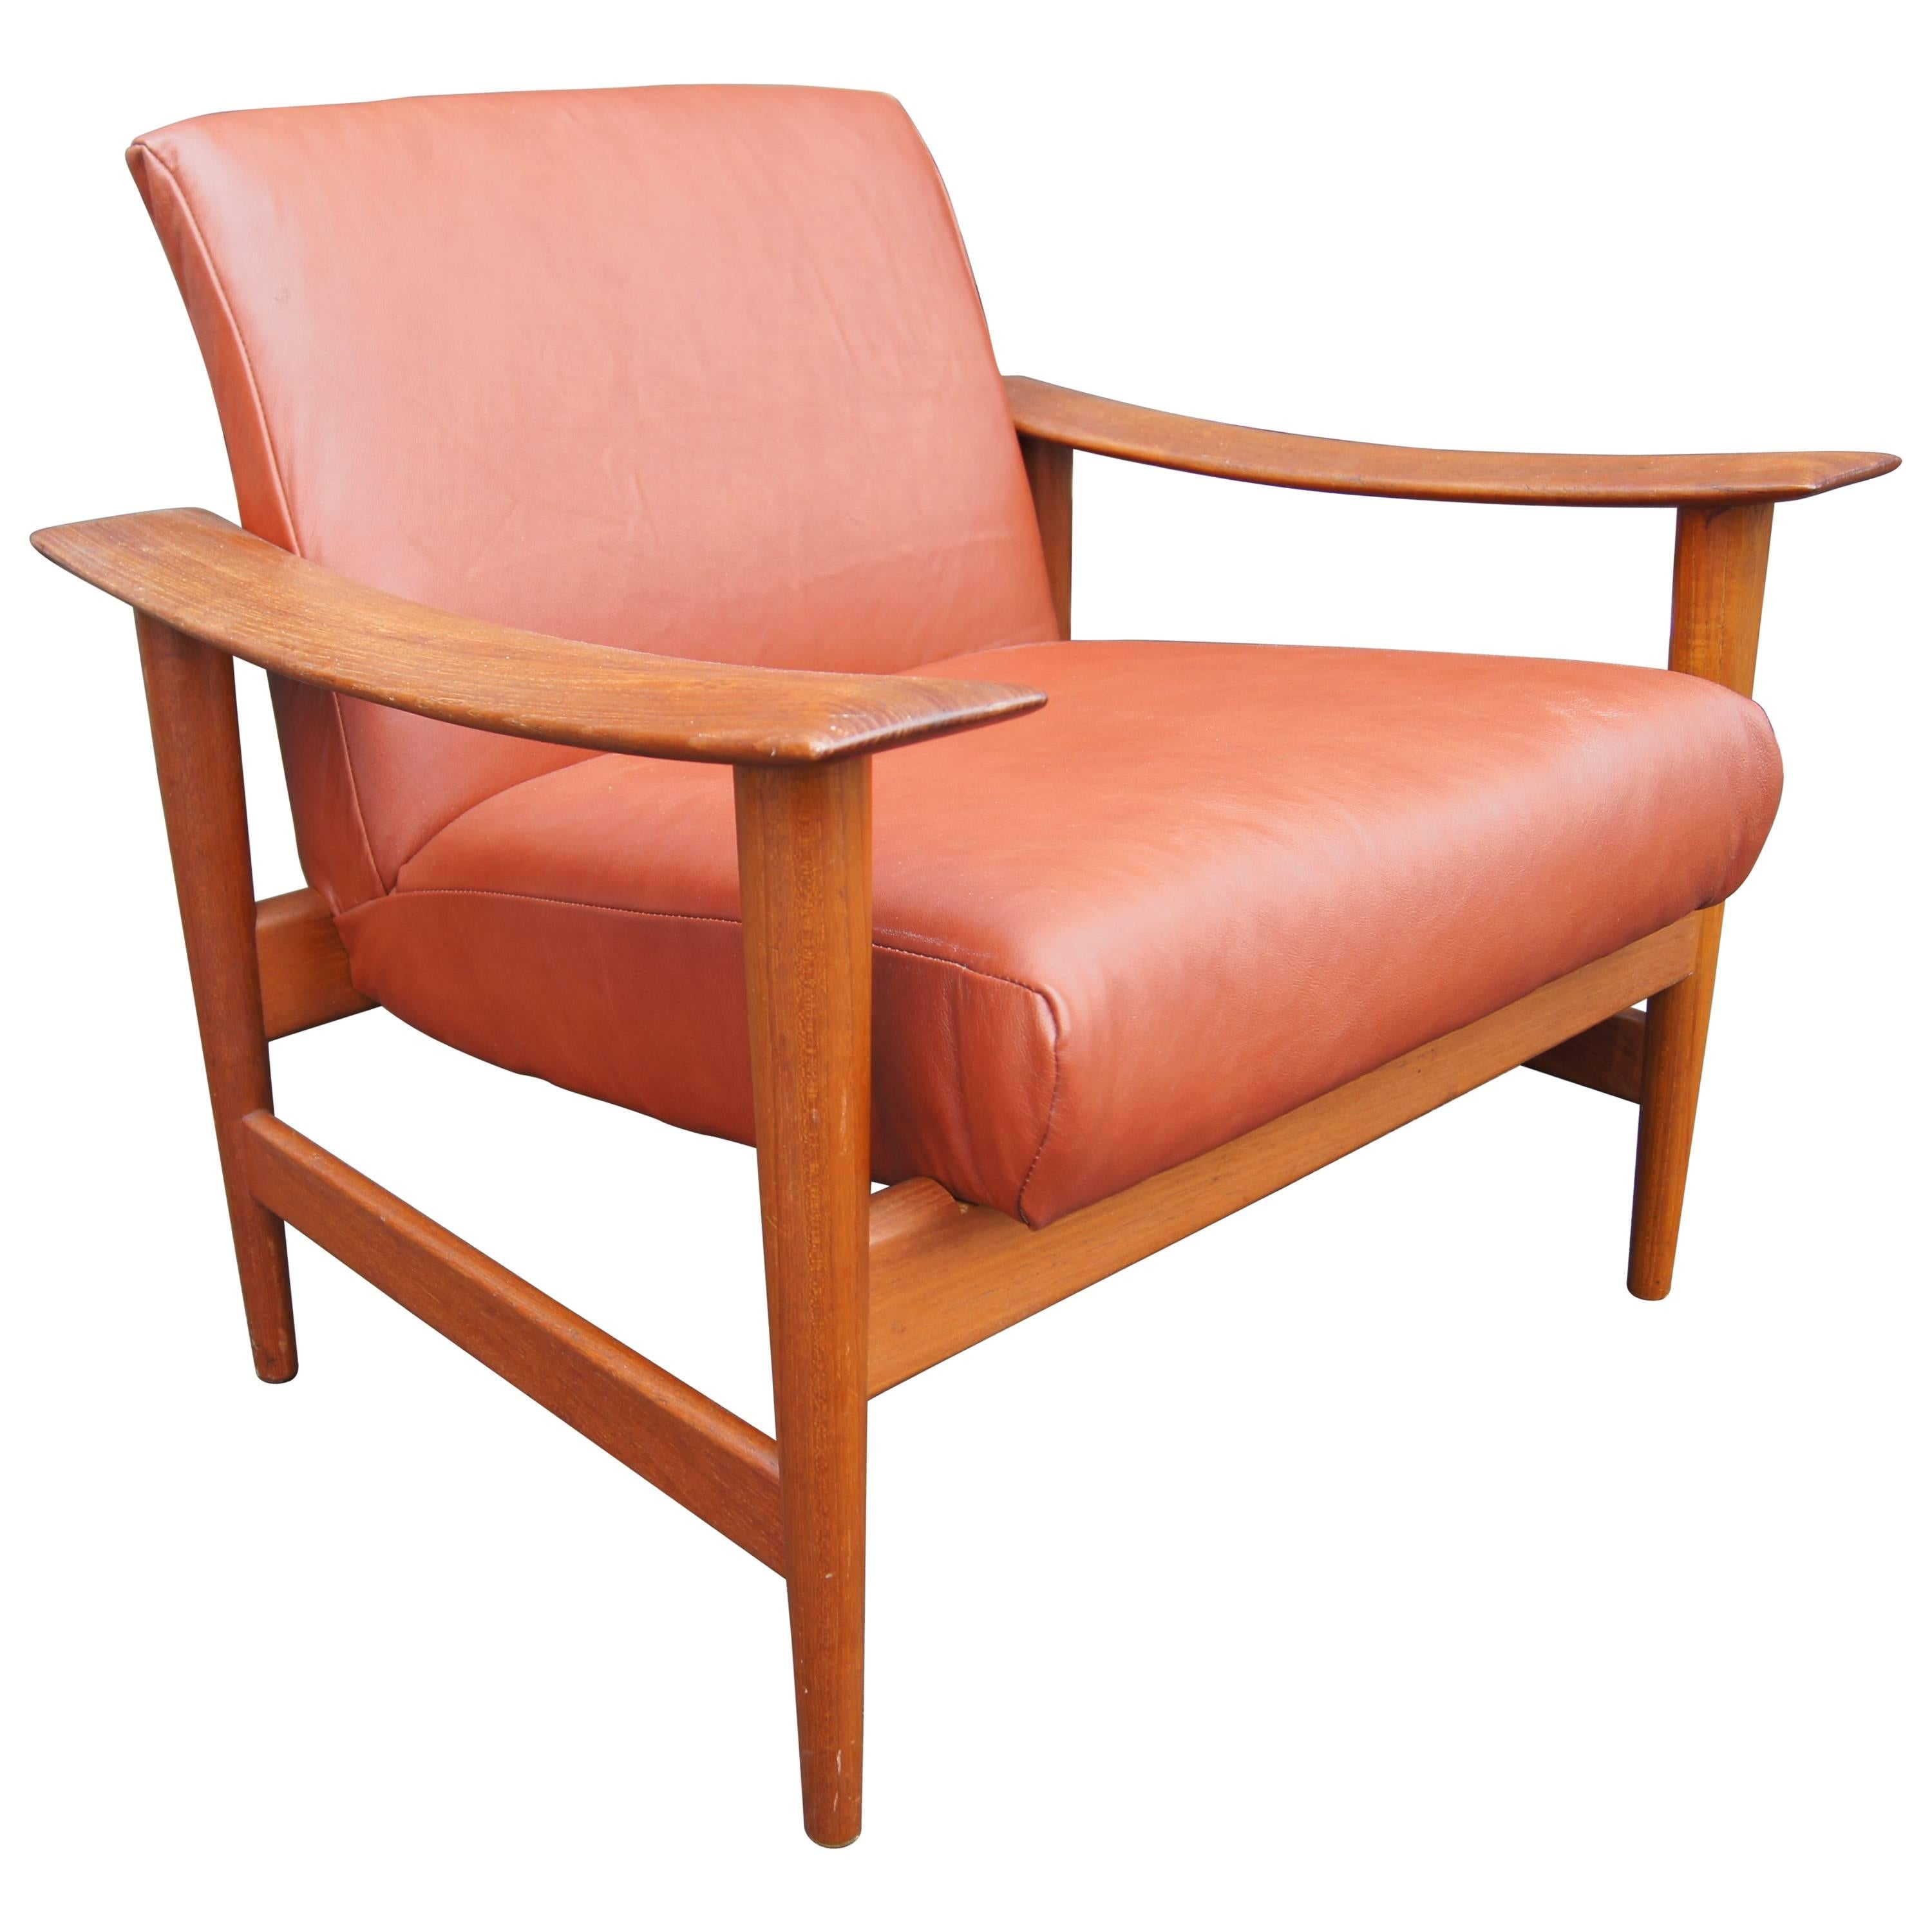 Danish Modern Leather and Teak Lounge Chair in the Style of Illum Wikkelsø